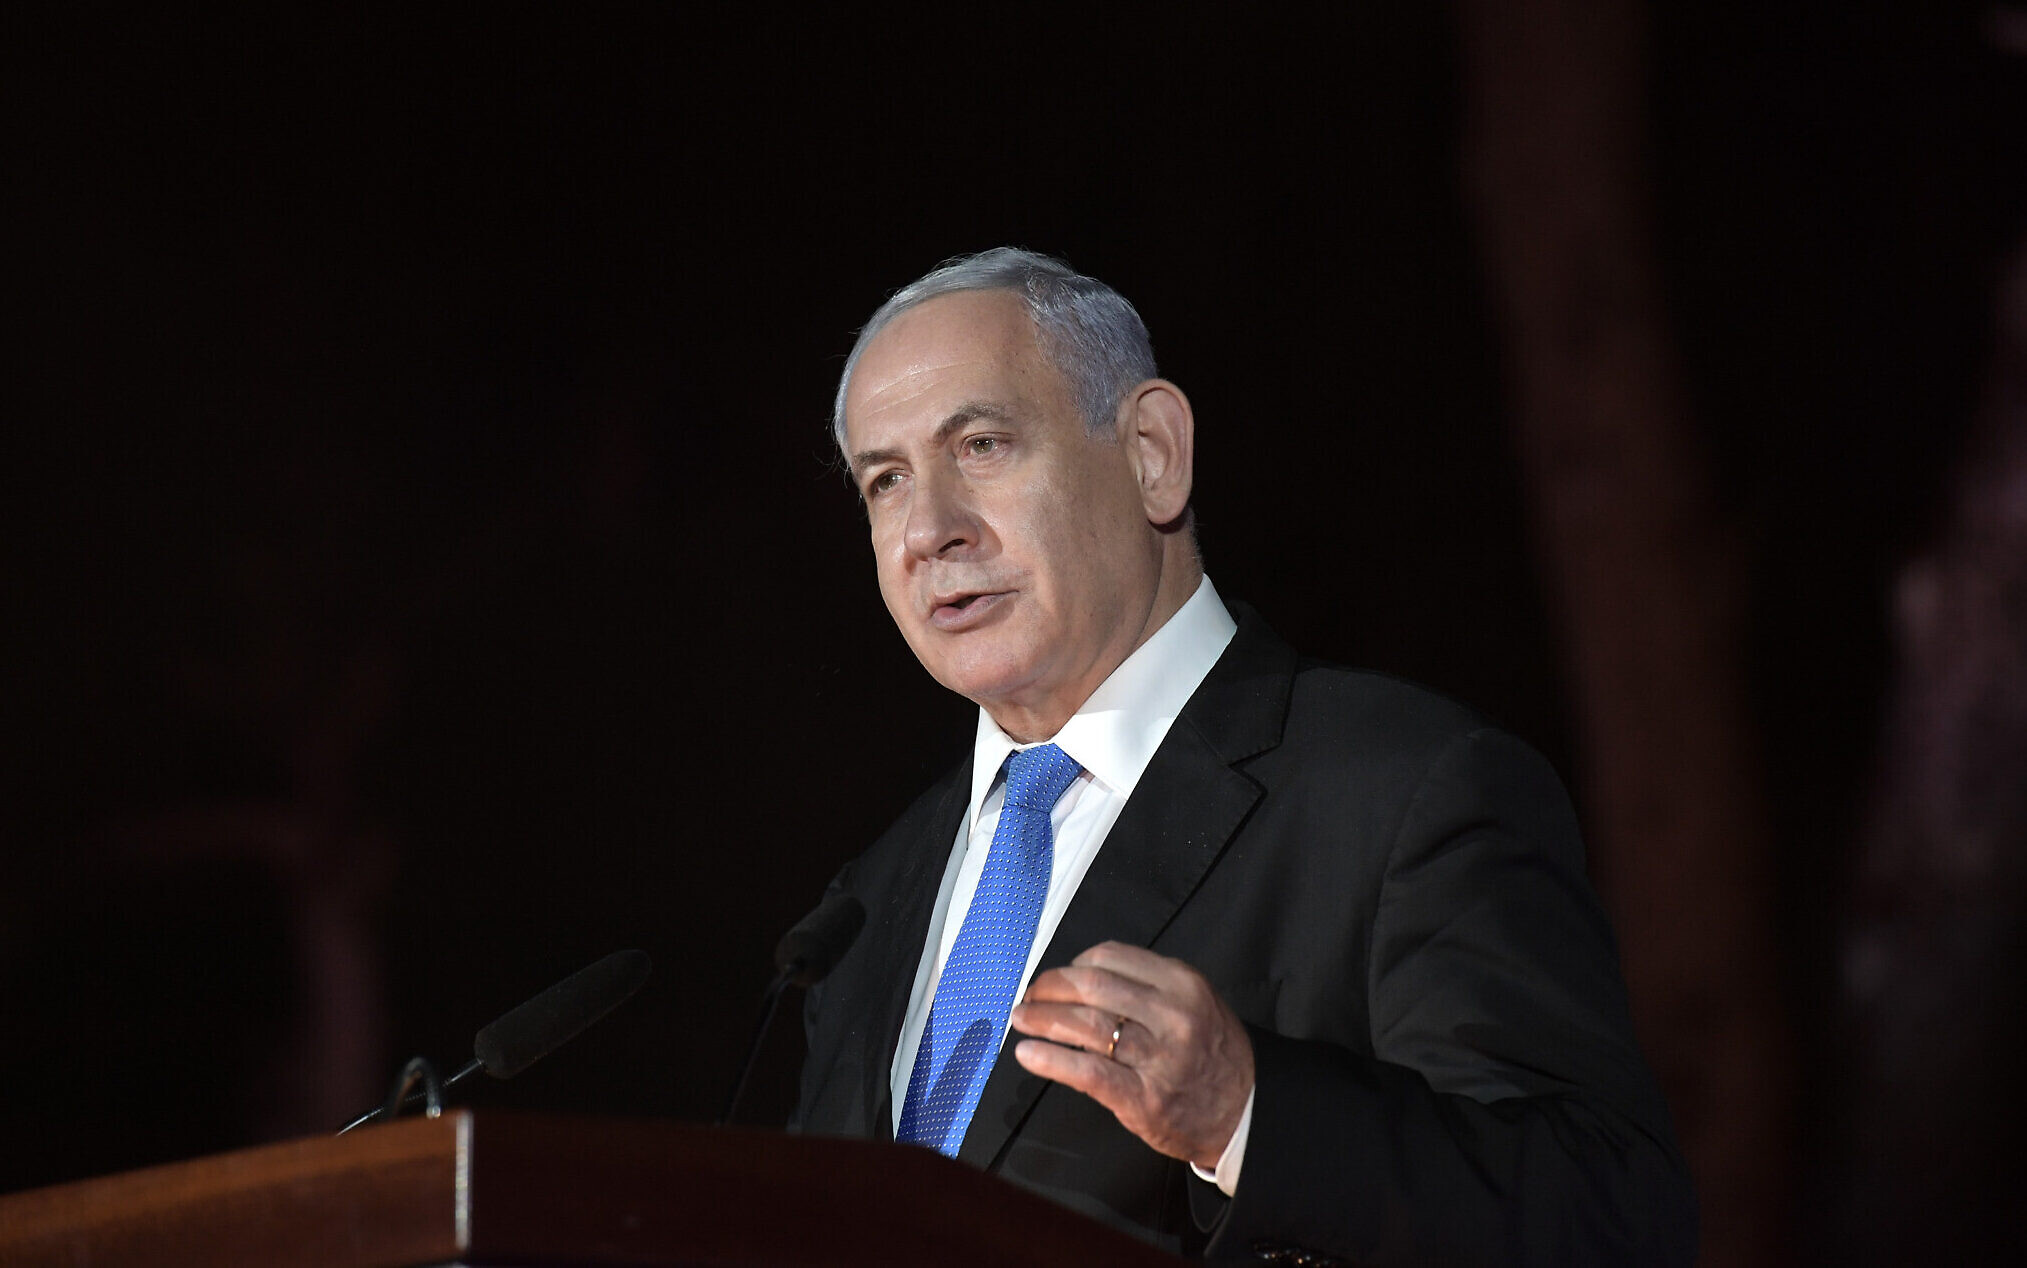 Netanyahu Vows Hamas Will Pay Heavy Price For Firing Rockets At Jerusalem The Times Of Israel